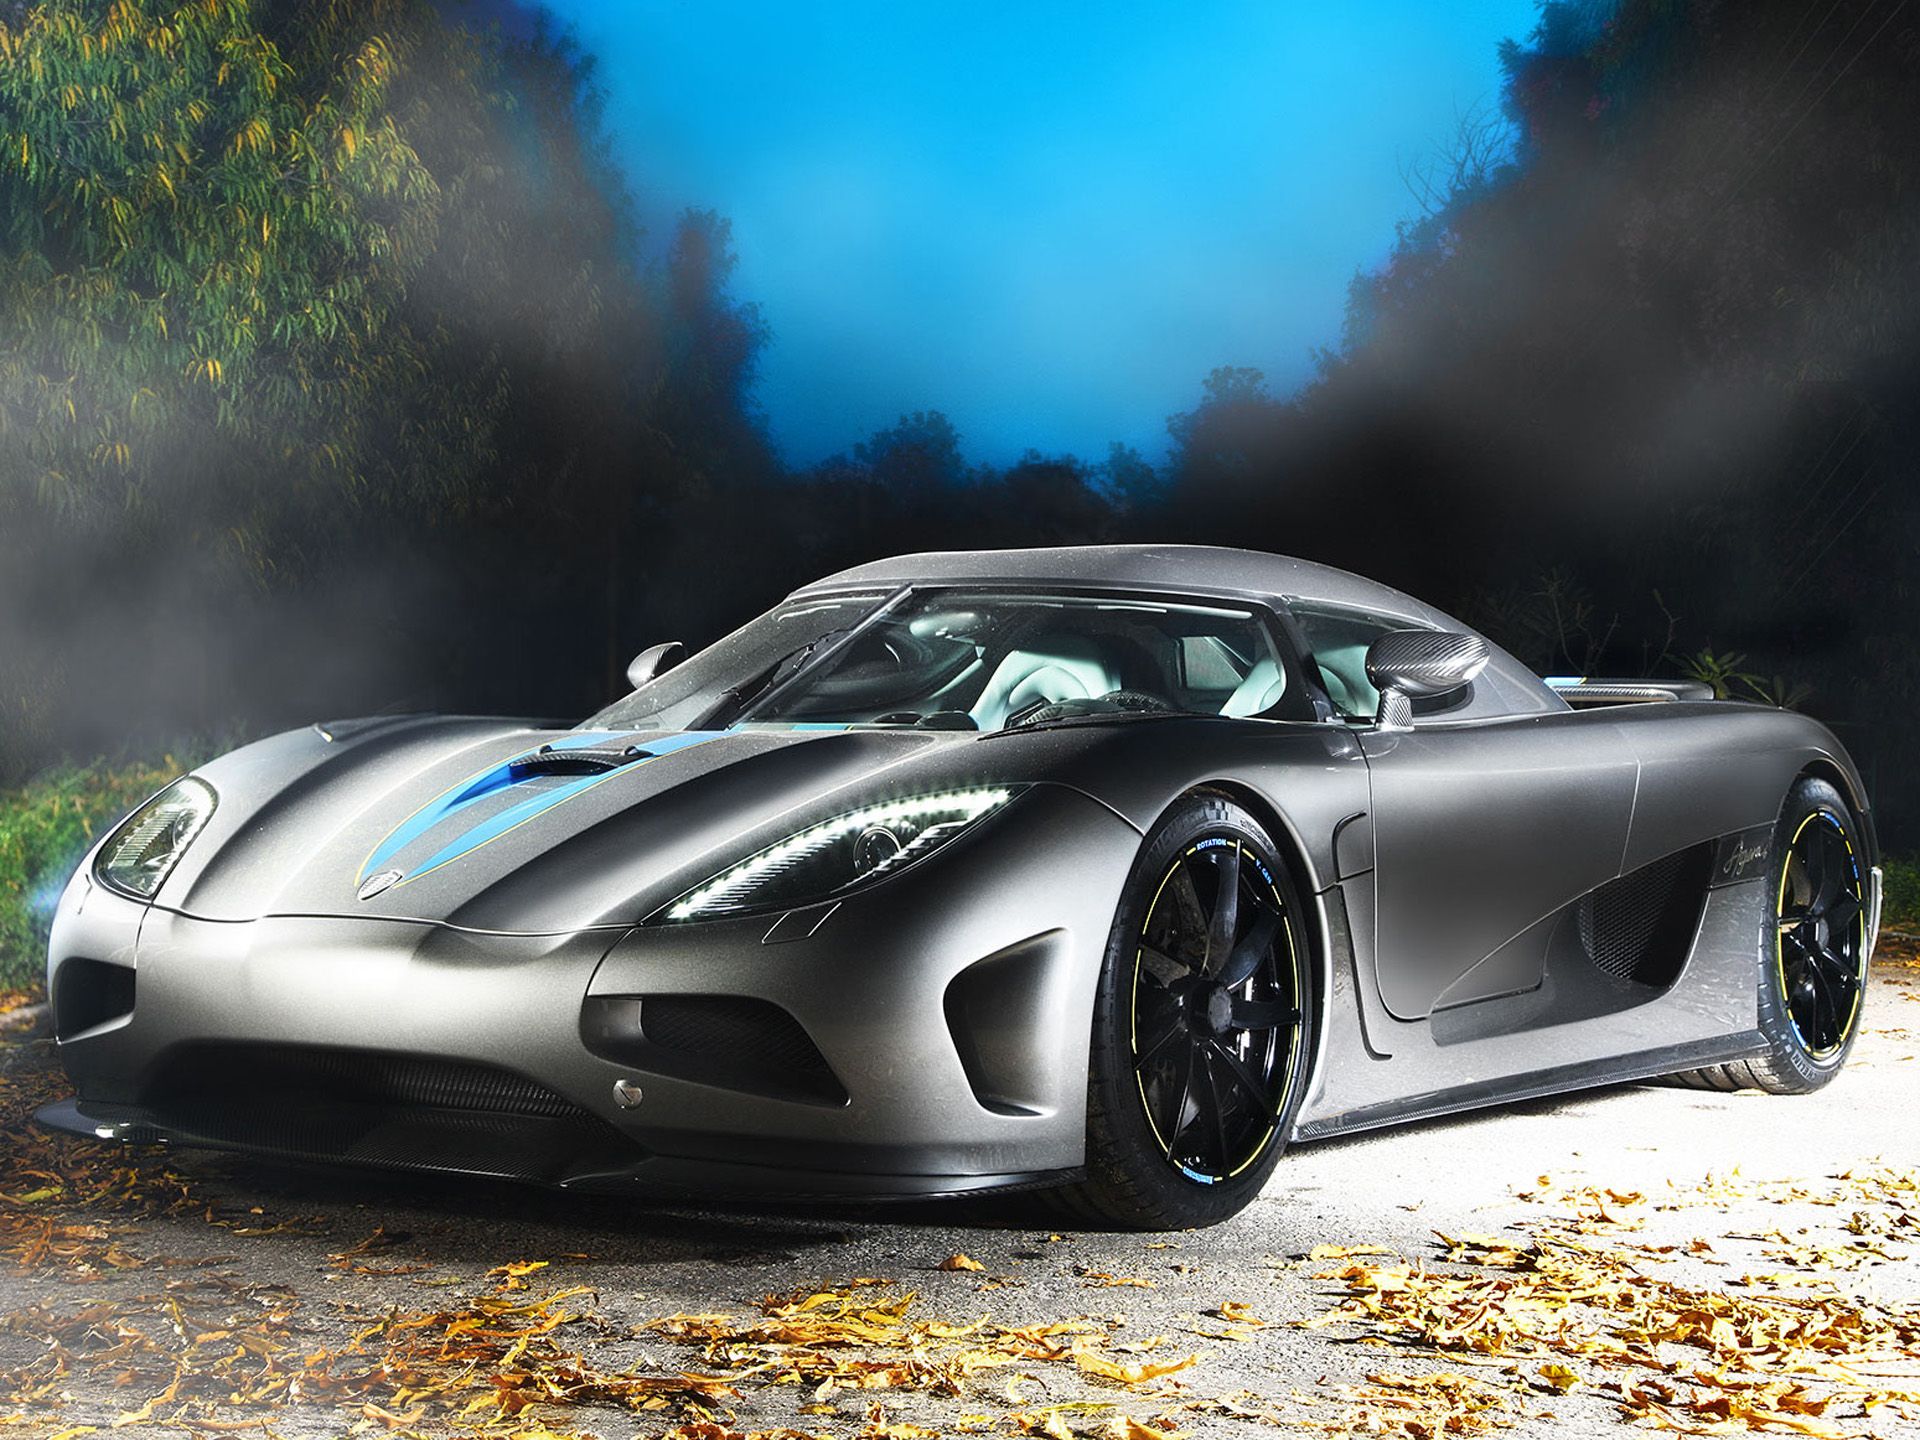 2013 Hypercar wallpaper-1080p Free HD Resolution - 9to5 Car Wallpapers